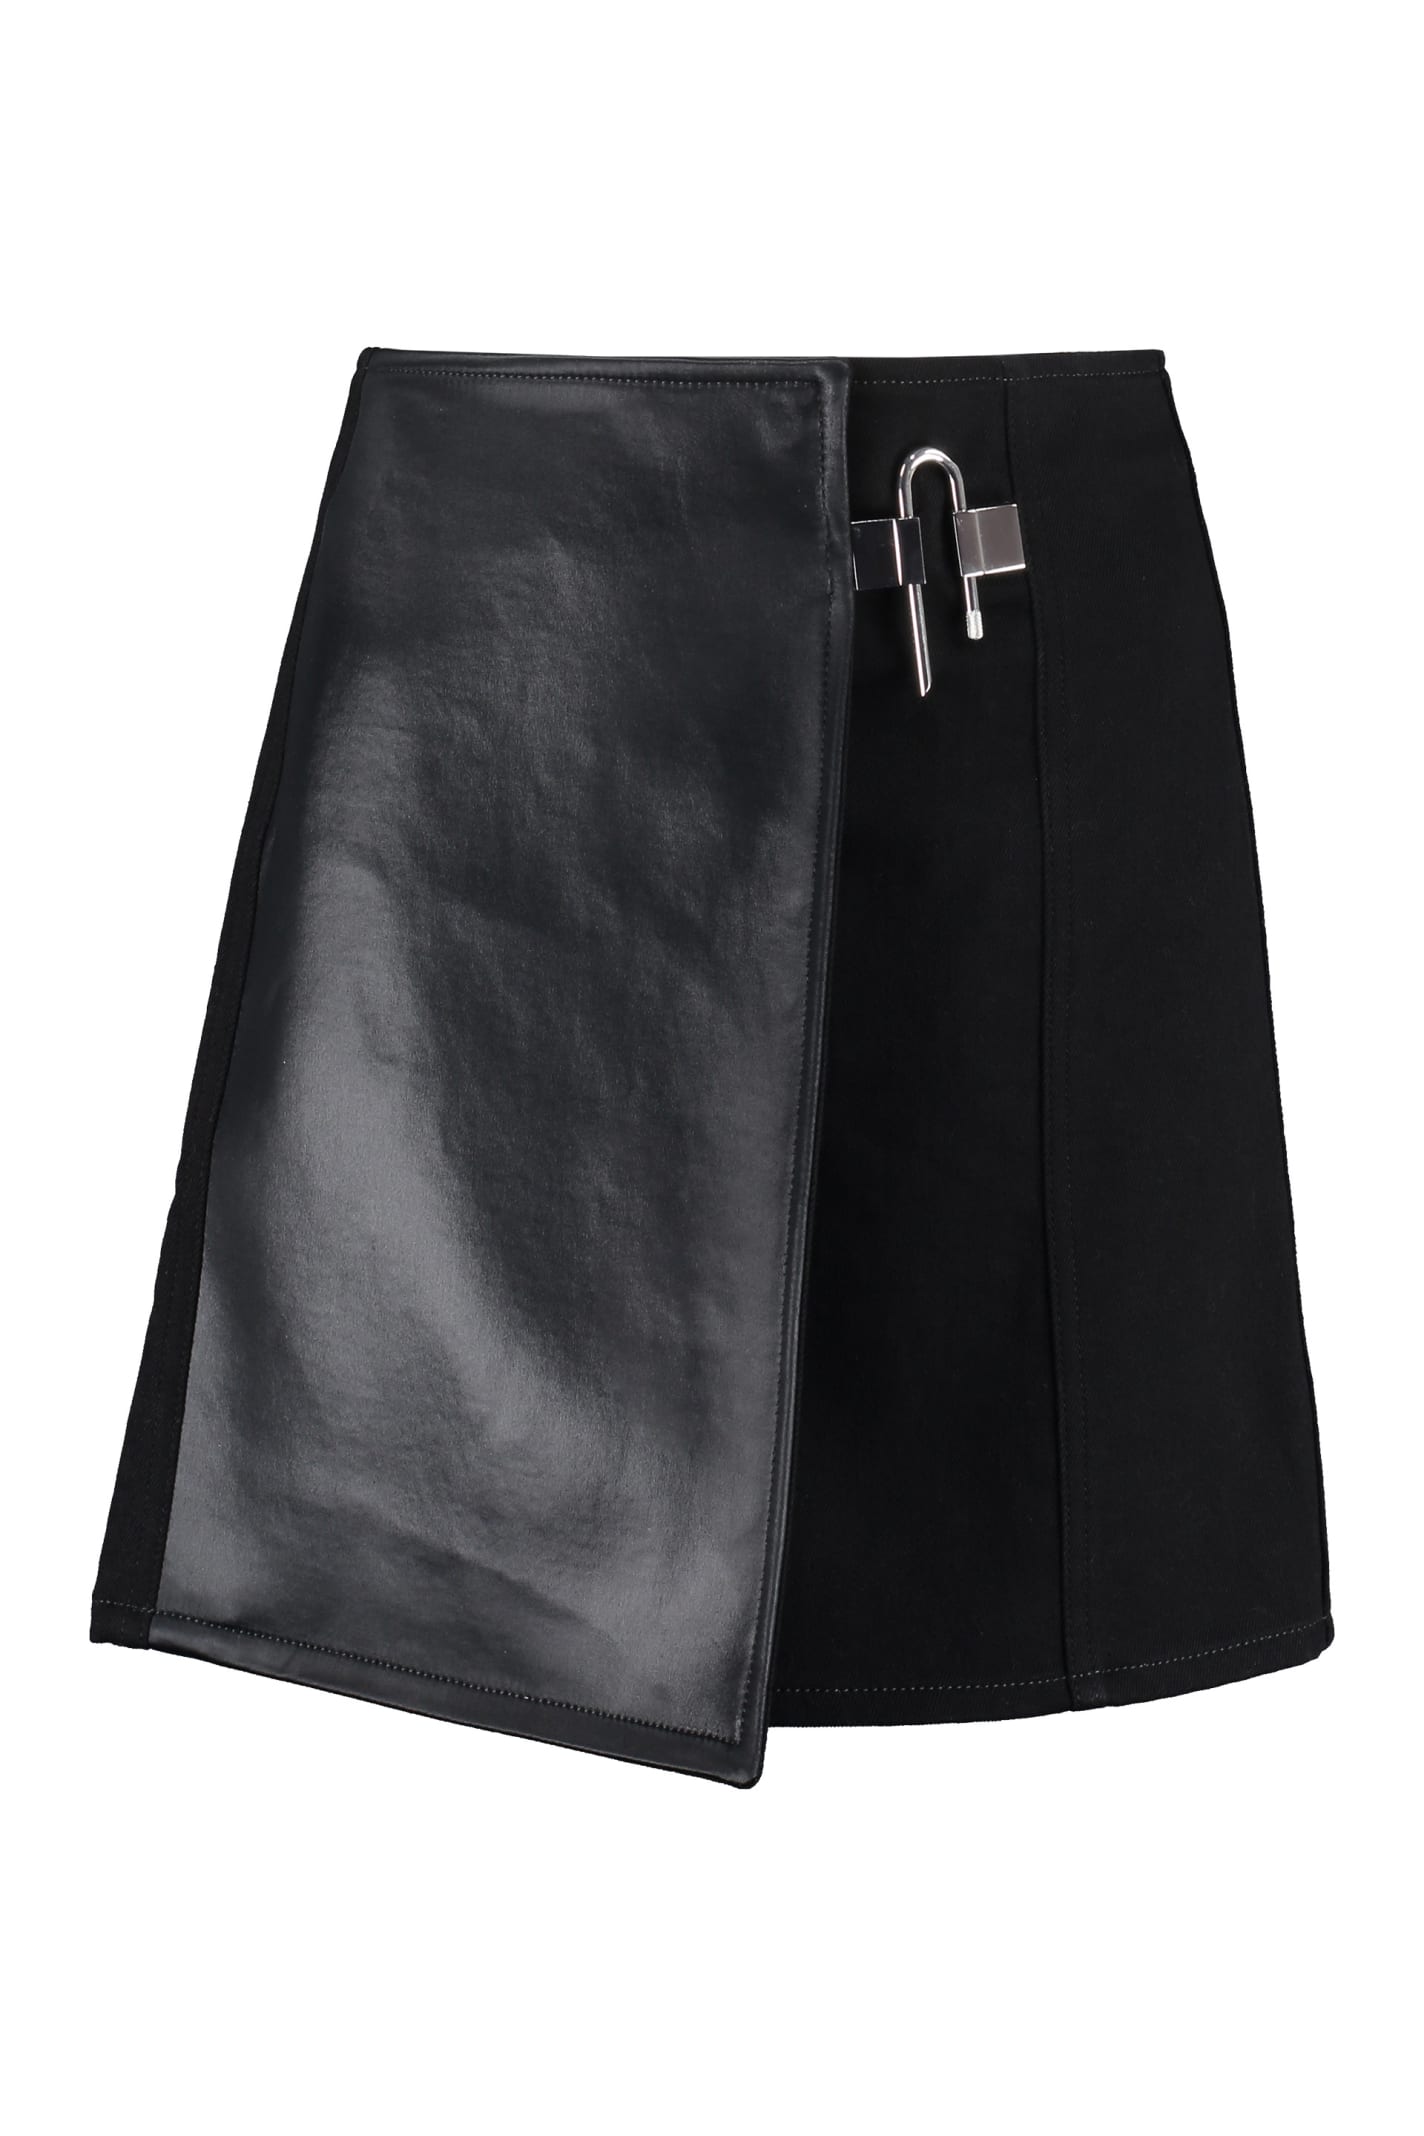 Givenchy Cotton Wrap Skirt